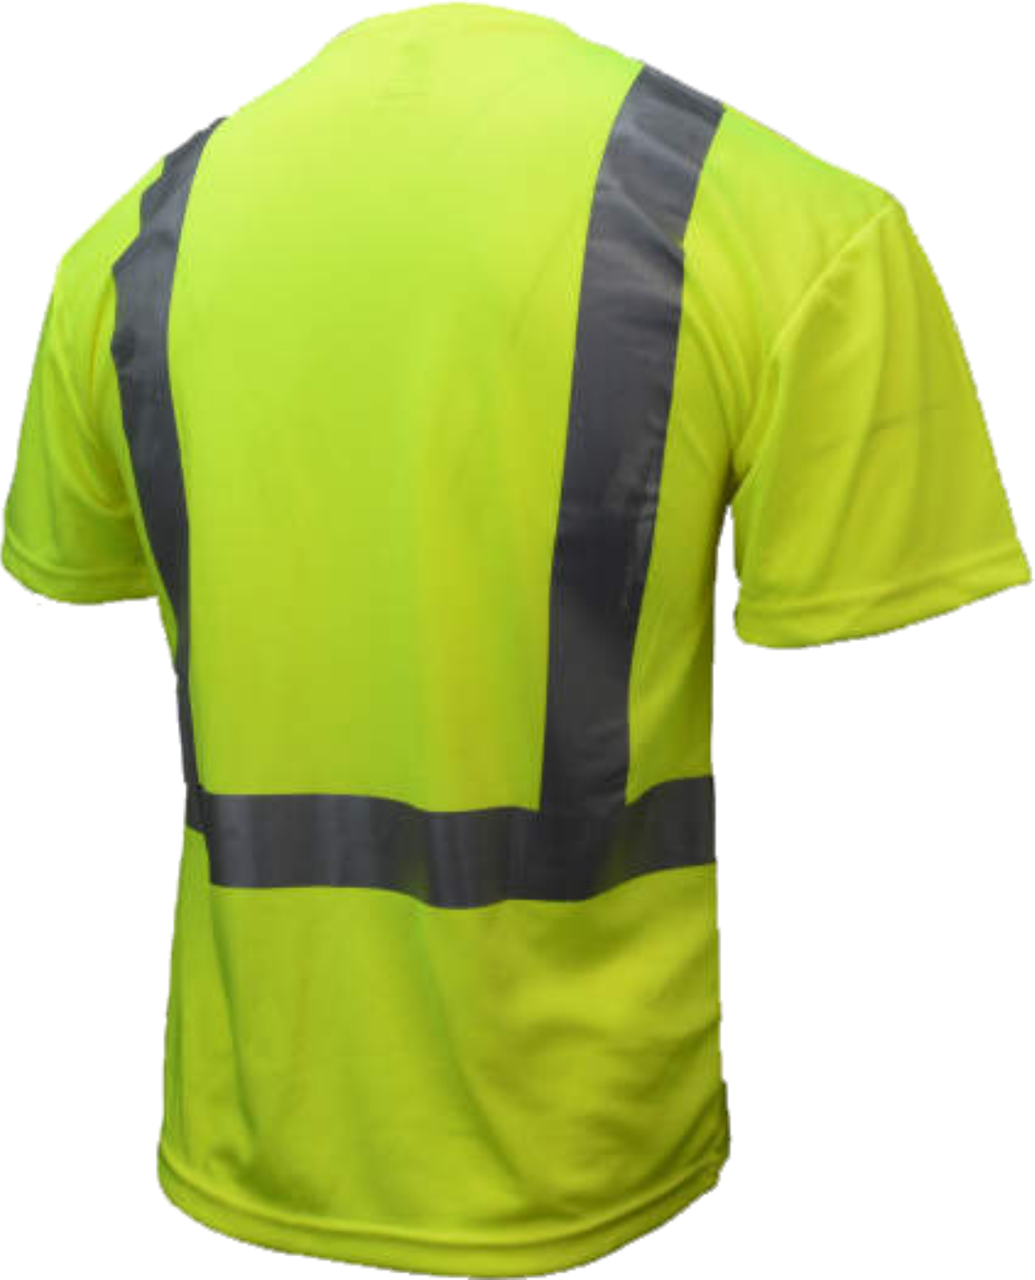 Class 2 High Visibility Safety T-Shirt with Max-Dri™ | Safety Green Hi Vis TShirt with Pocket | Polyester Hi Vis Class 2 Tee  | Reflective Safety Shirt